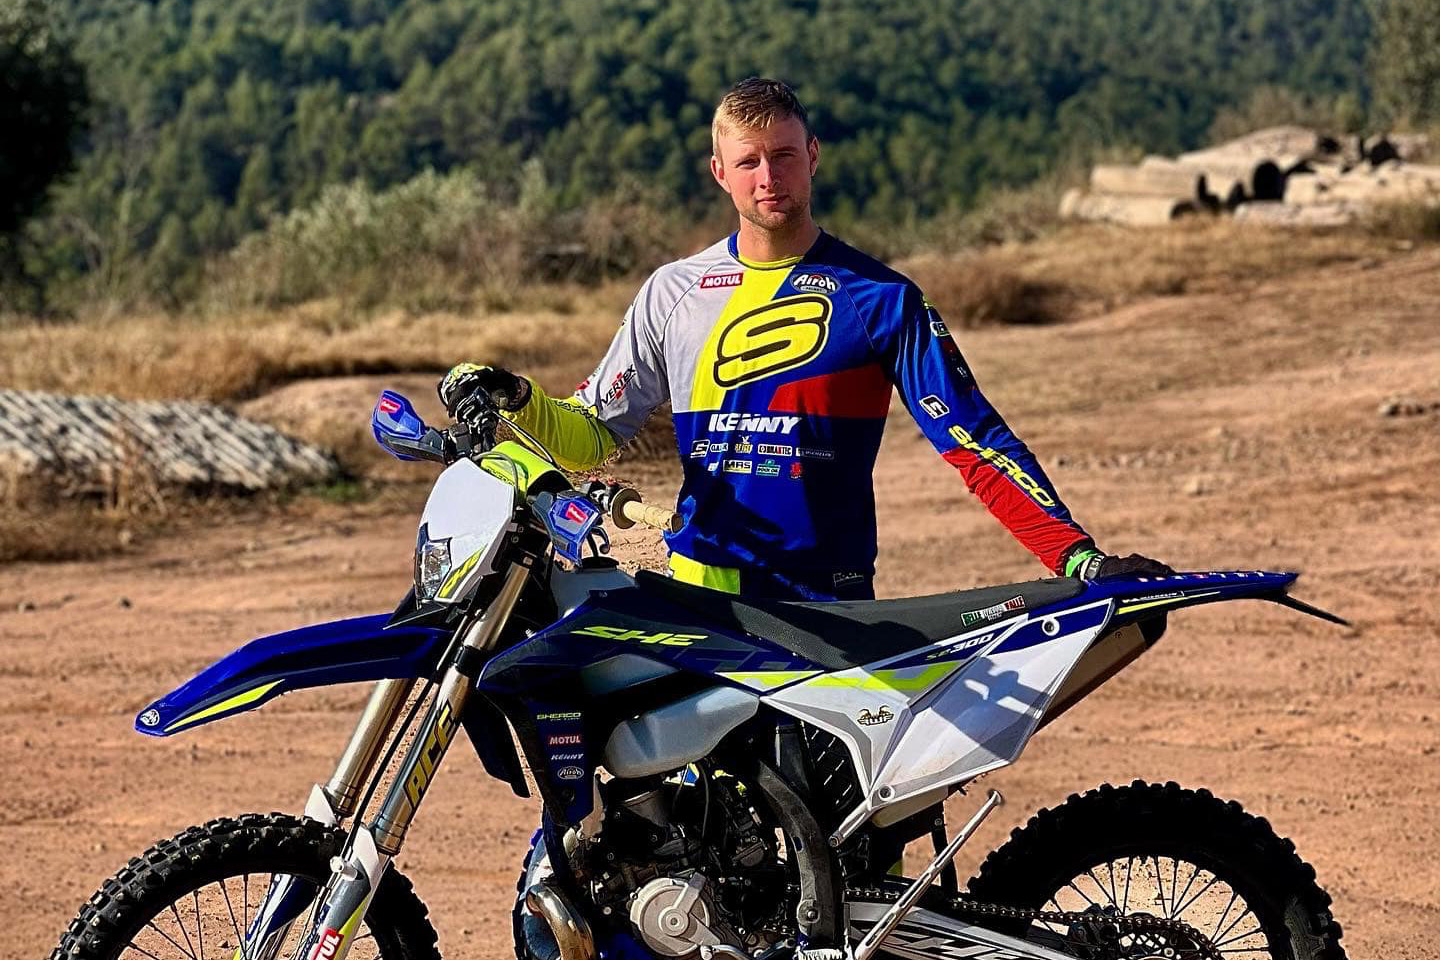 Former TrialGP rider Dan Peace switches to Hard Enduro with Eurotek Sherco